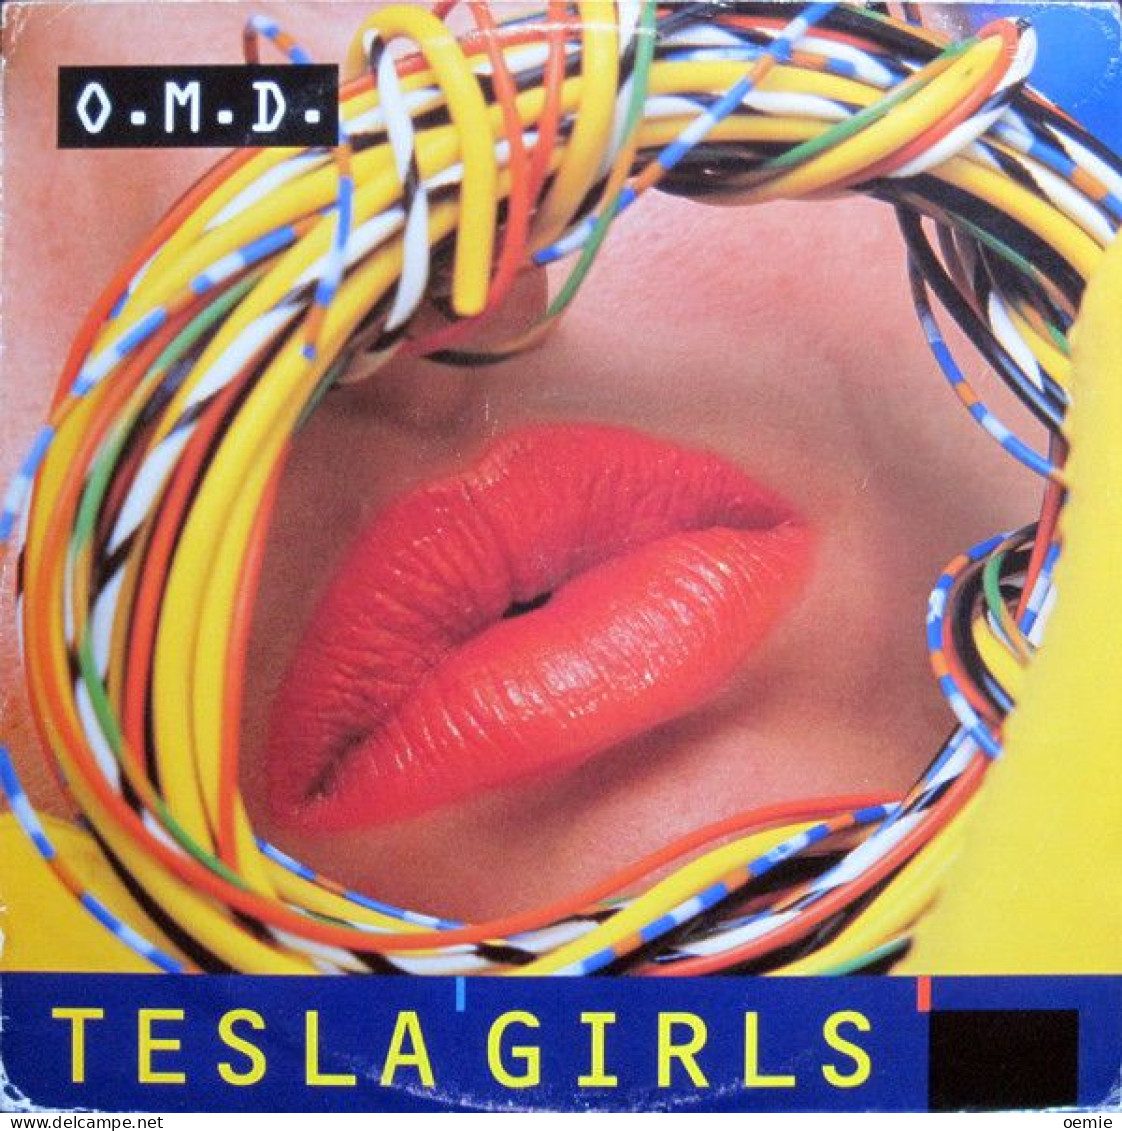 ORCHESTRAL  MANOEUVRES  IN THE DARK    TESLA  GIRLS - 45 Rpm - Maxi-Single